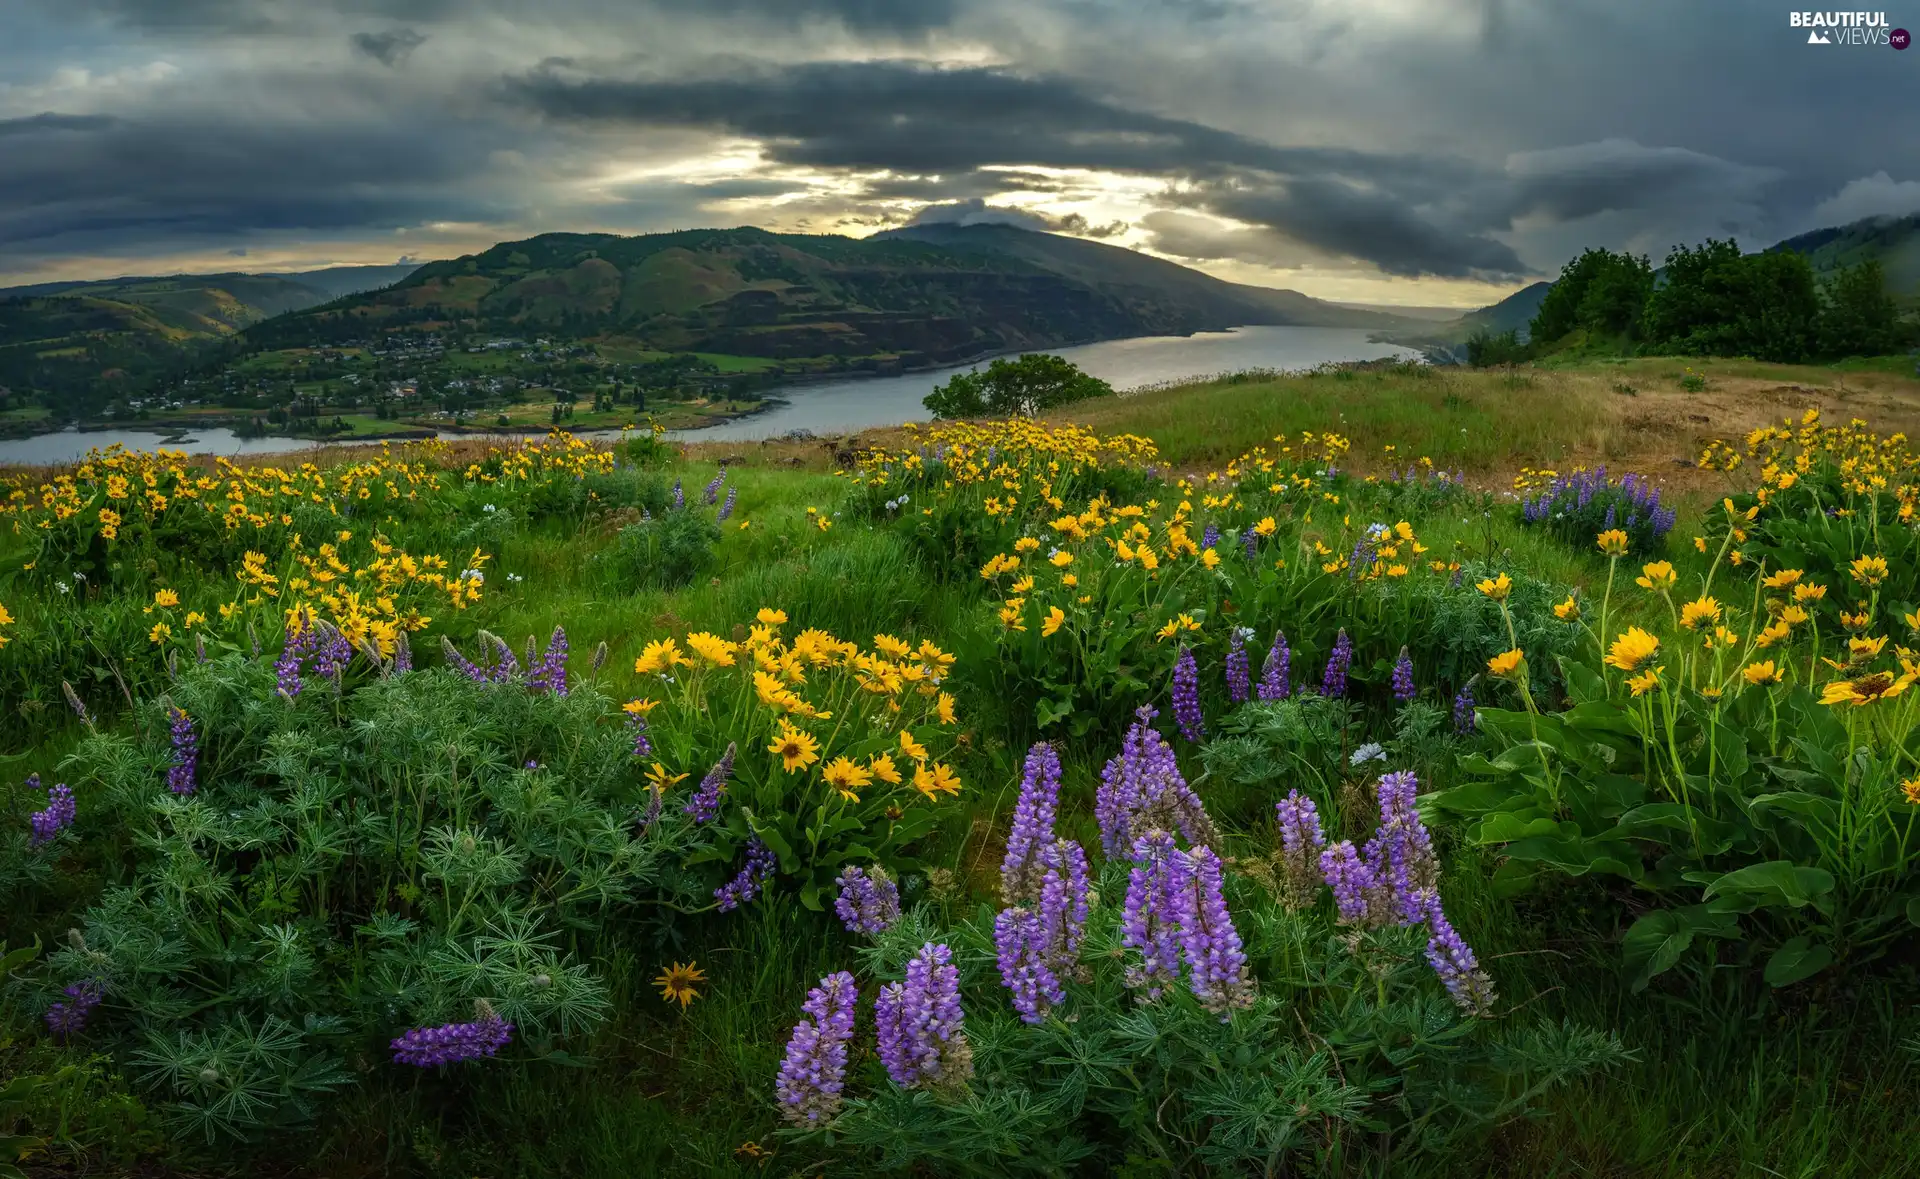 The Hills, Columbia River Gorge Nature Reserve, Meadow, Flowers, State of Oregon, The United States, River, Mountains, lupine